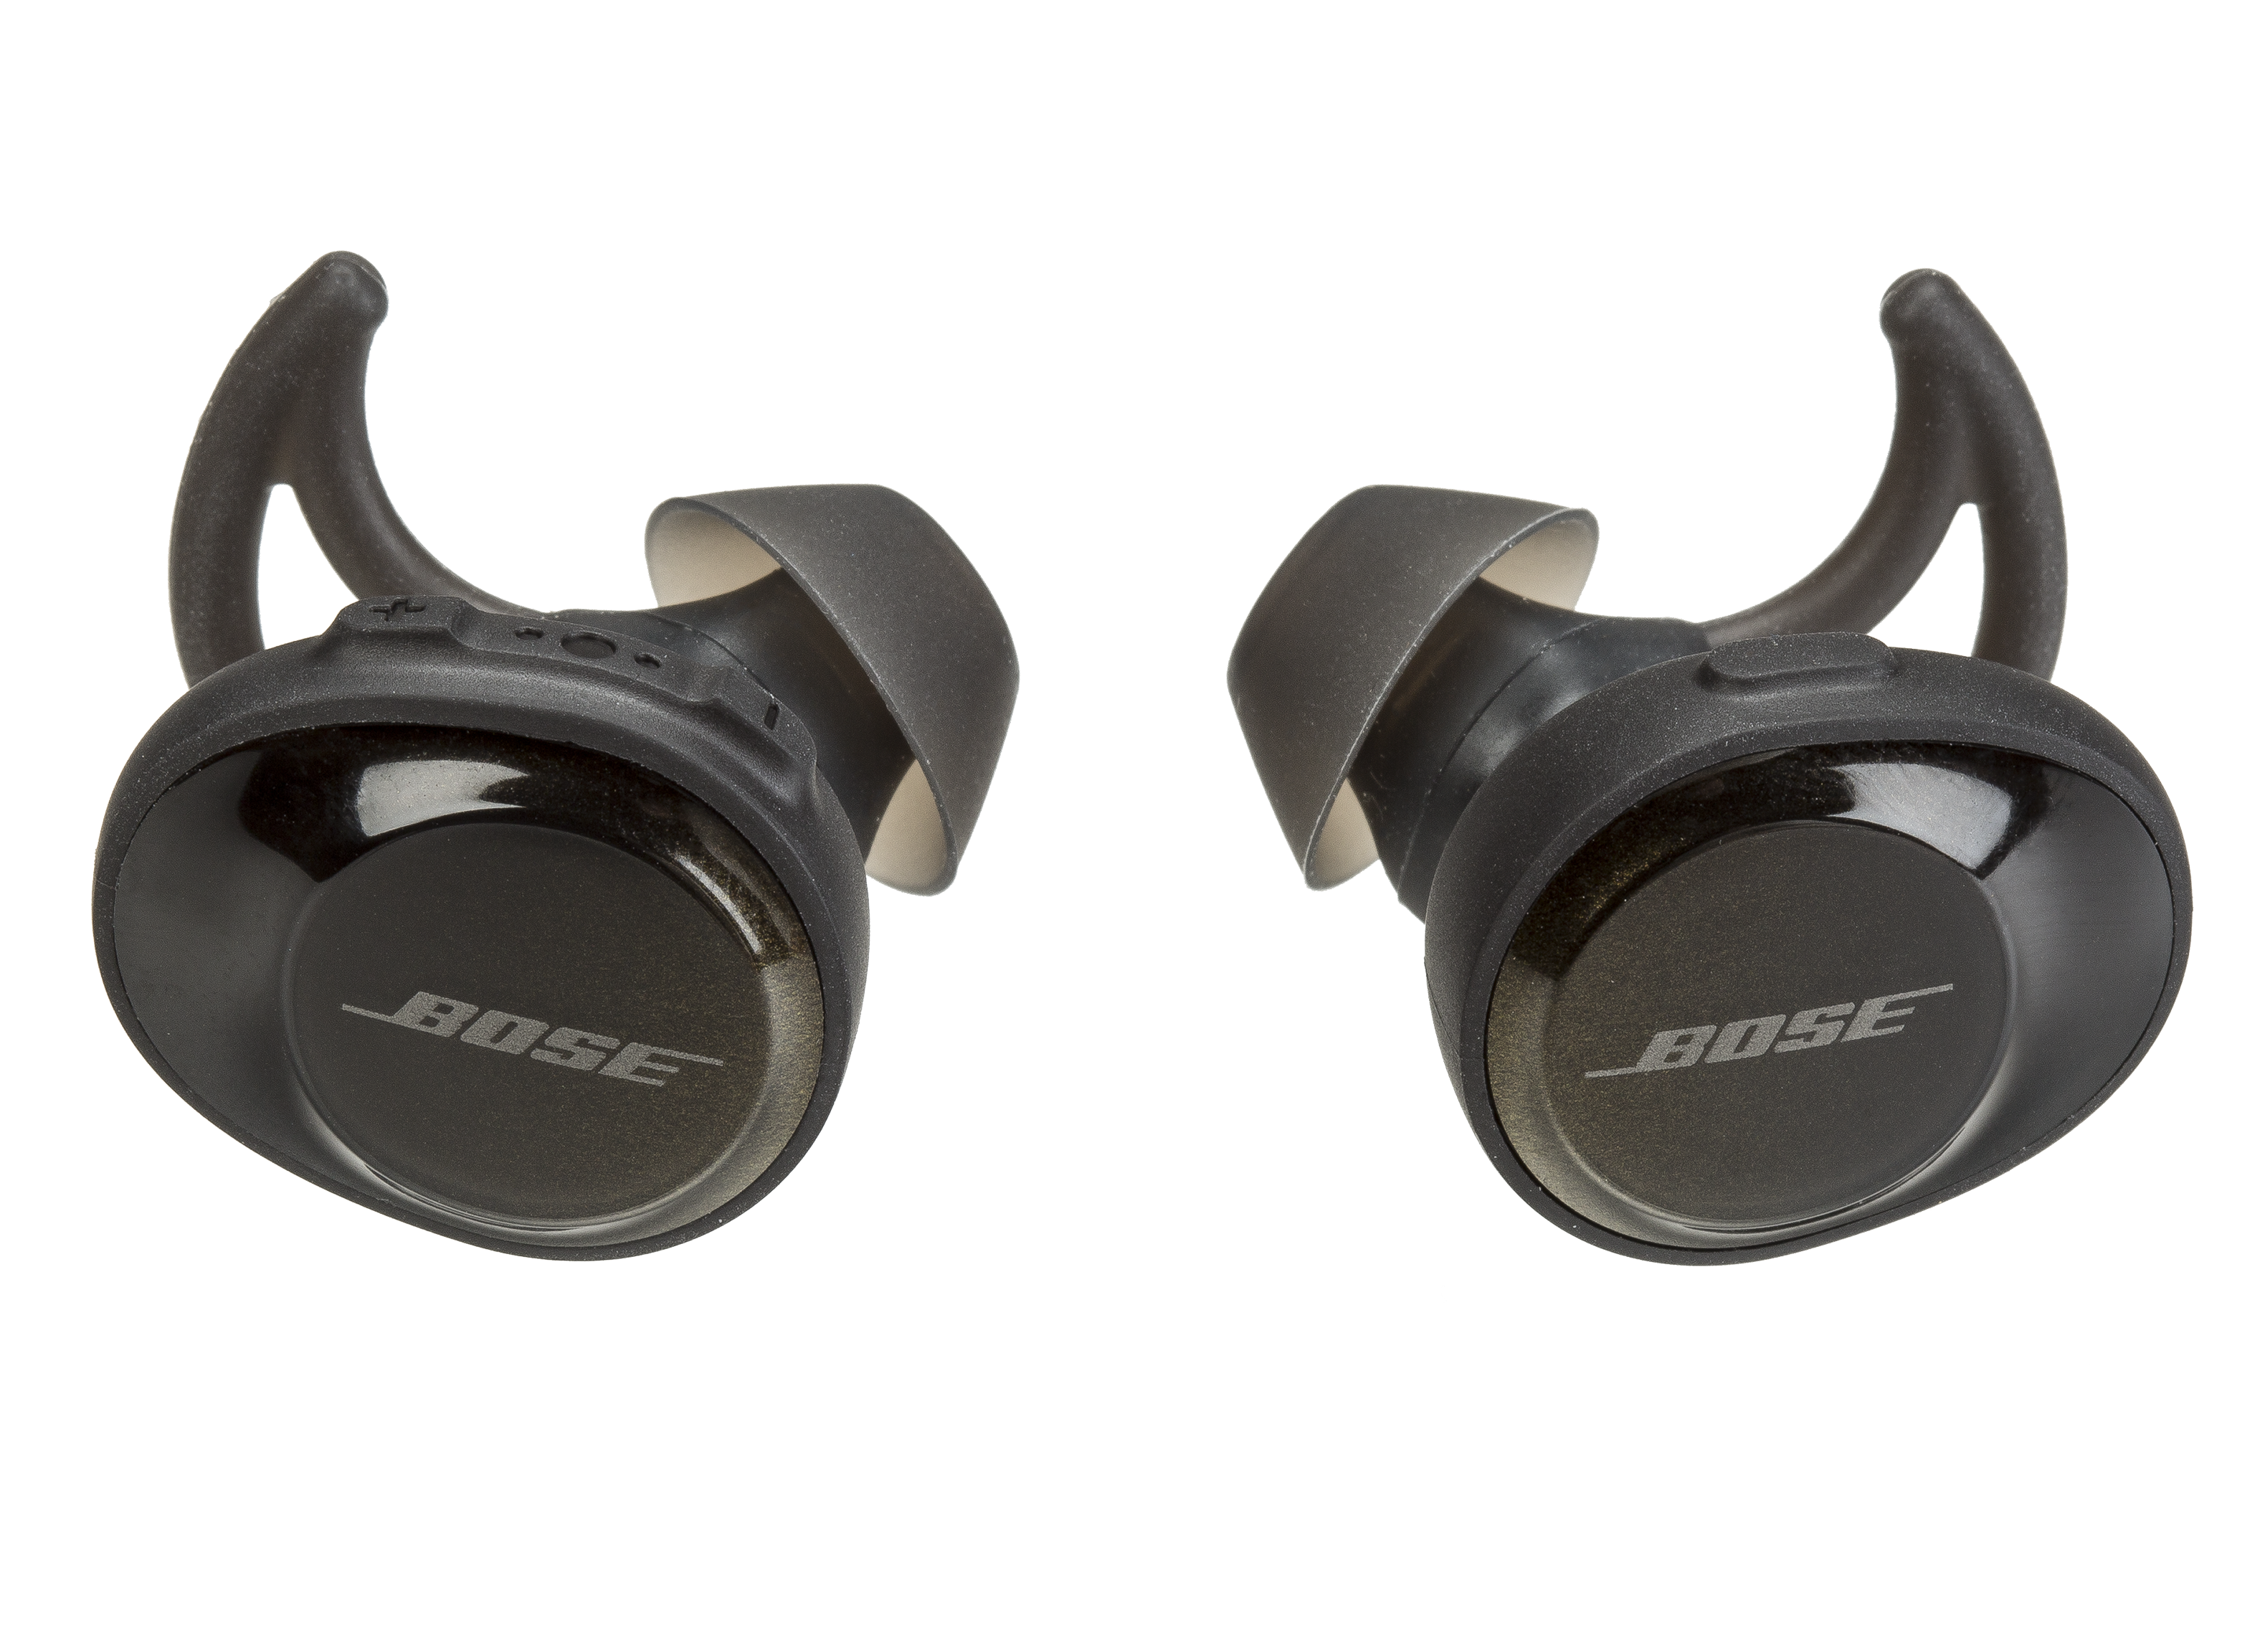 Bose SoundSport Free Wireless Headphone Review - Consumer Reports